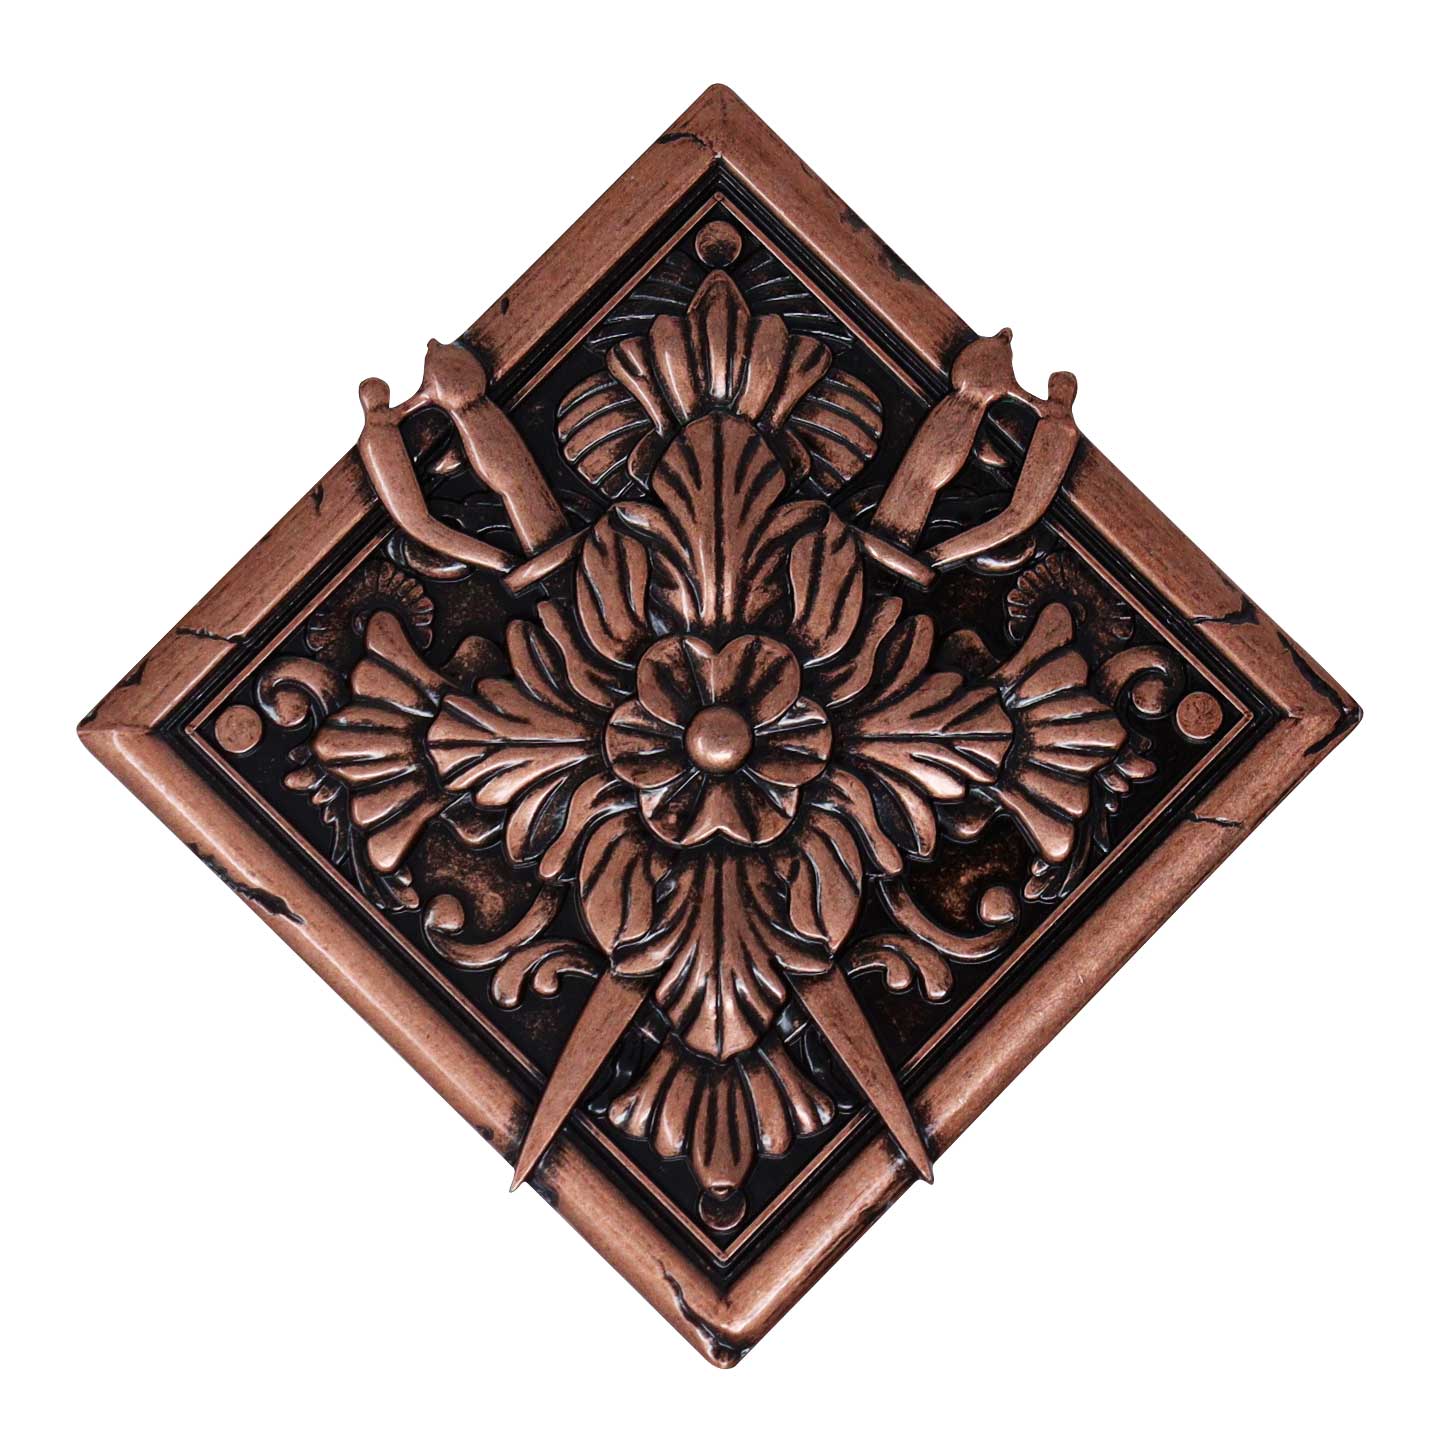 Resident Evil Village Limited Edition Replica House Crest Medallion Collection